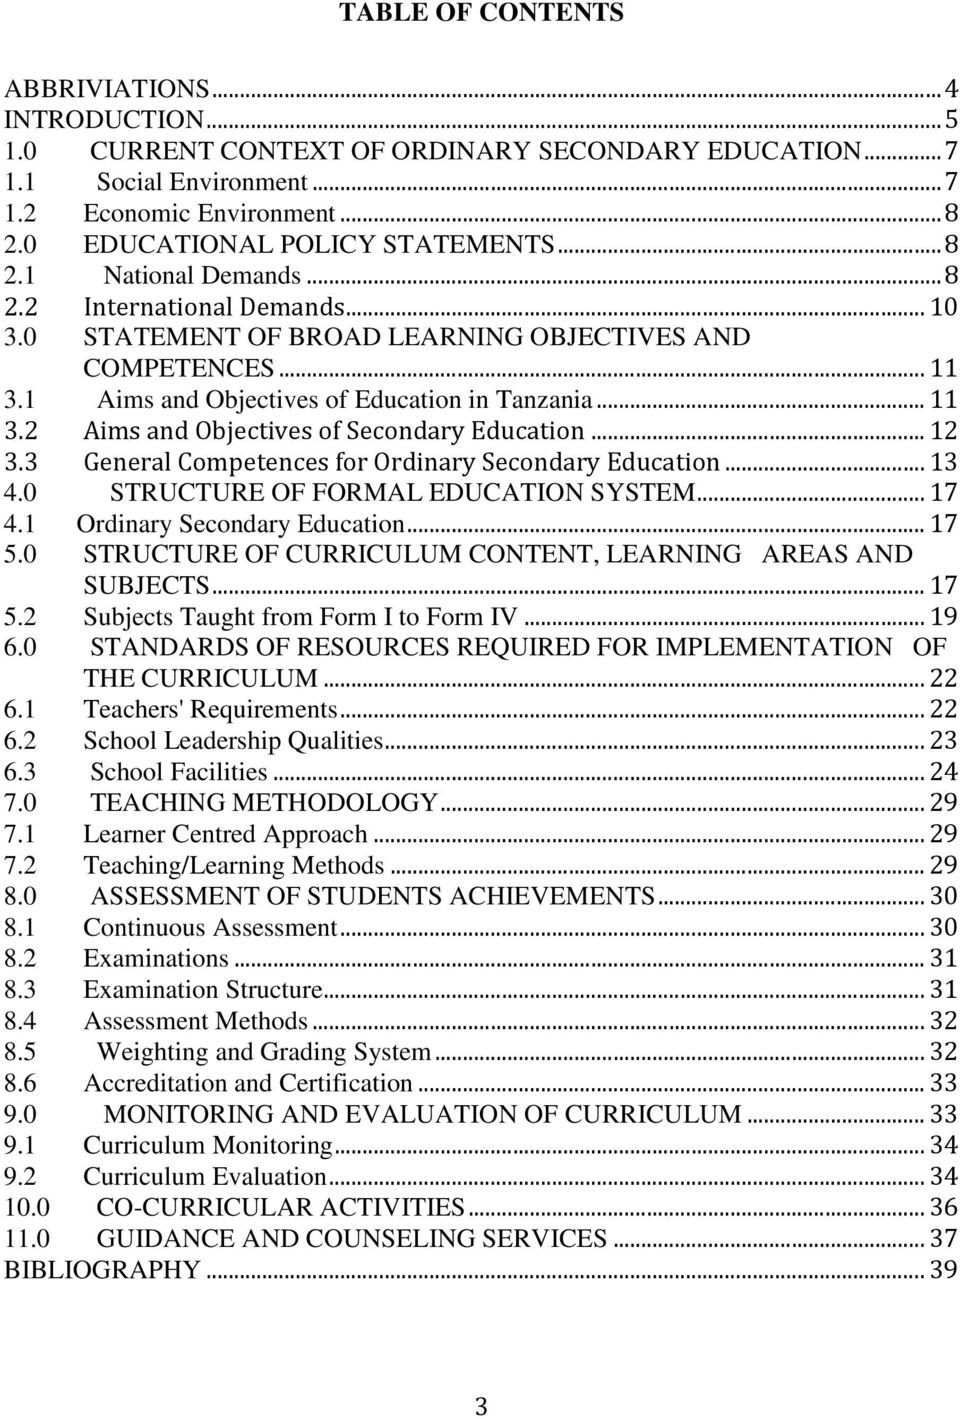 .. 12 3.3 General Competences for Ordinary Secondary Education... 13 4.0 STRUCTURE OF FORMAL EDUCATION SYSTEM... 17 4.1 Ordinary Secondary Education... 17 5.